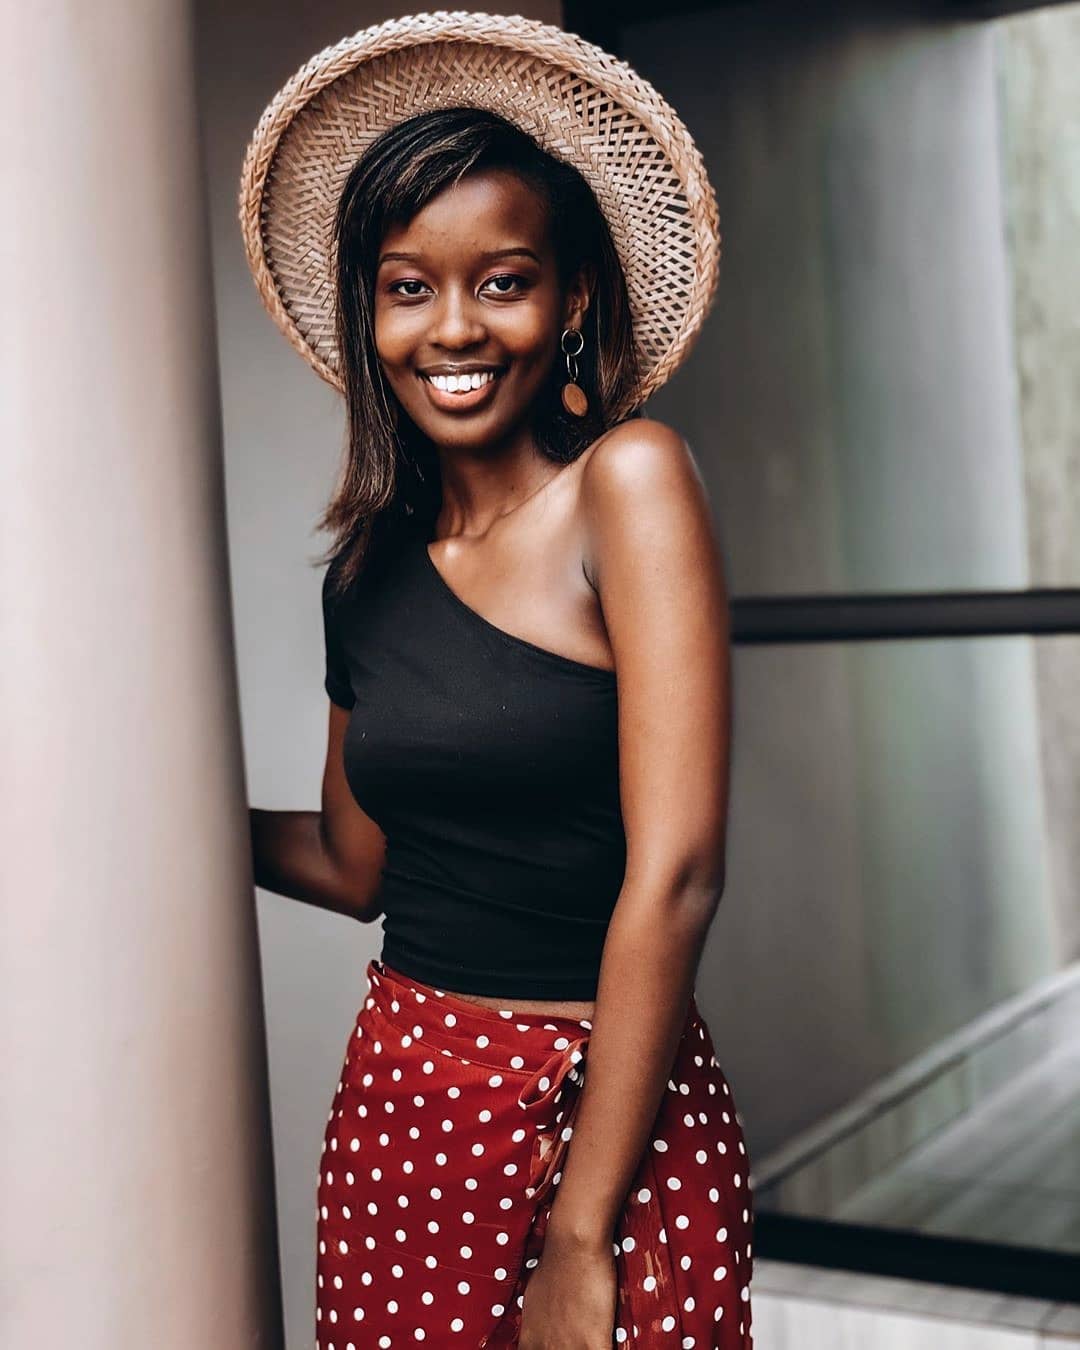 SHEIN.COM - A look is never complete without a smile🥰 @theakanakintama

Shop Item #: 1283416

#SHEINgals #SHEINstyle #polkadots